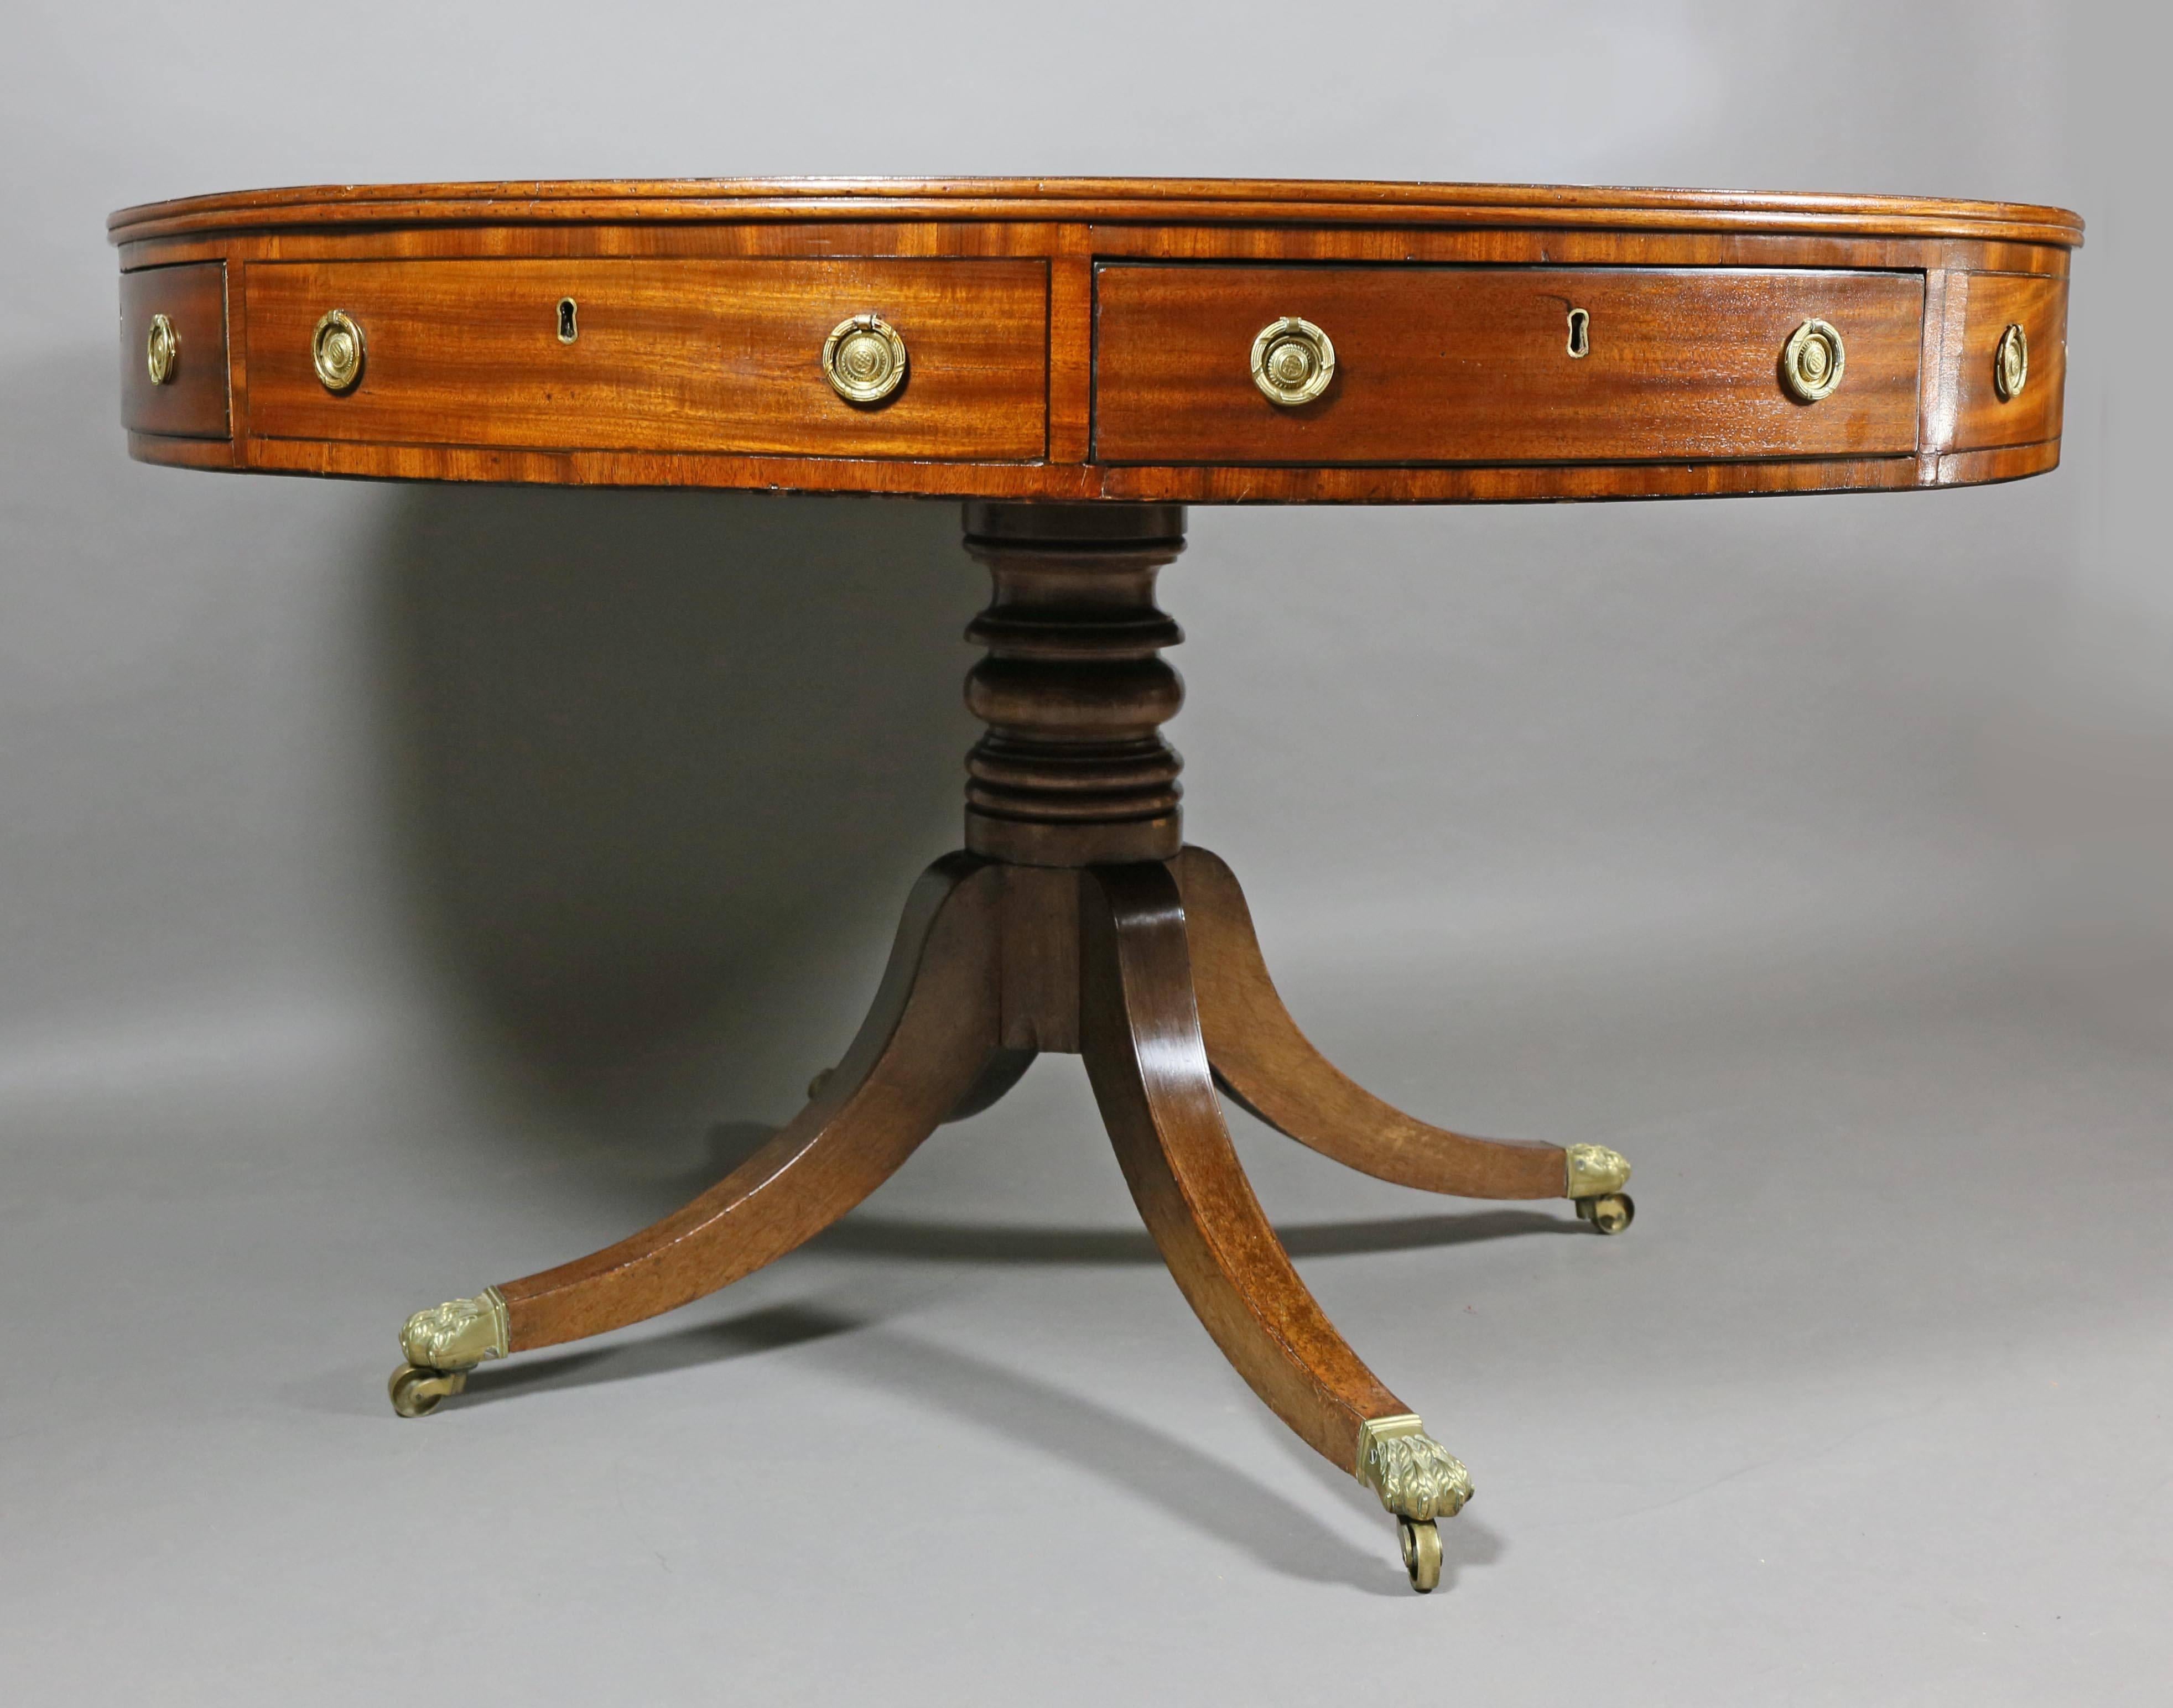 Circular inset blackish blue leather top over a series of false and working drawers raised on a ring turned support and four saber legs ending in paw from cup casters.